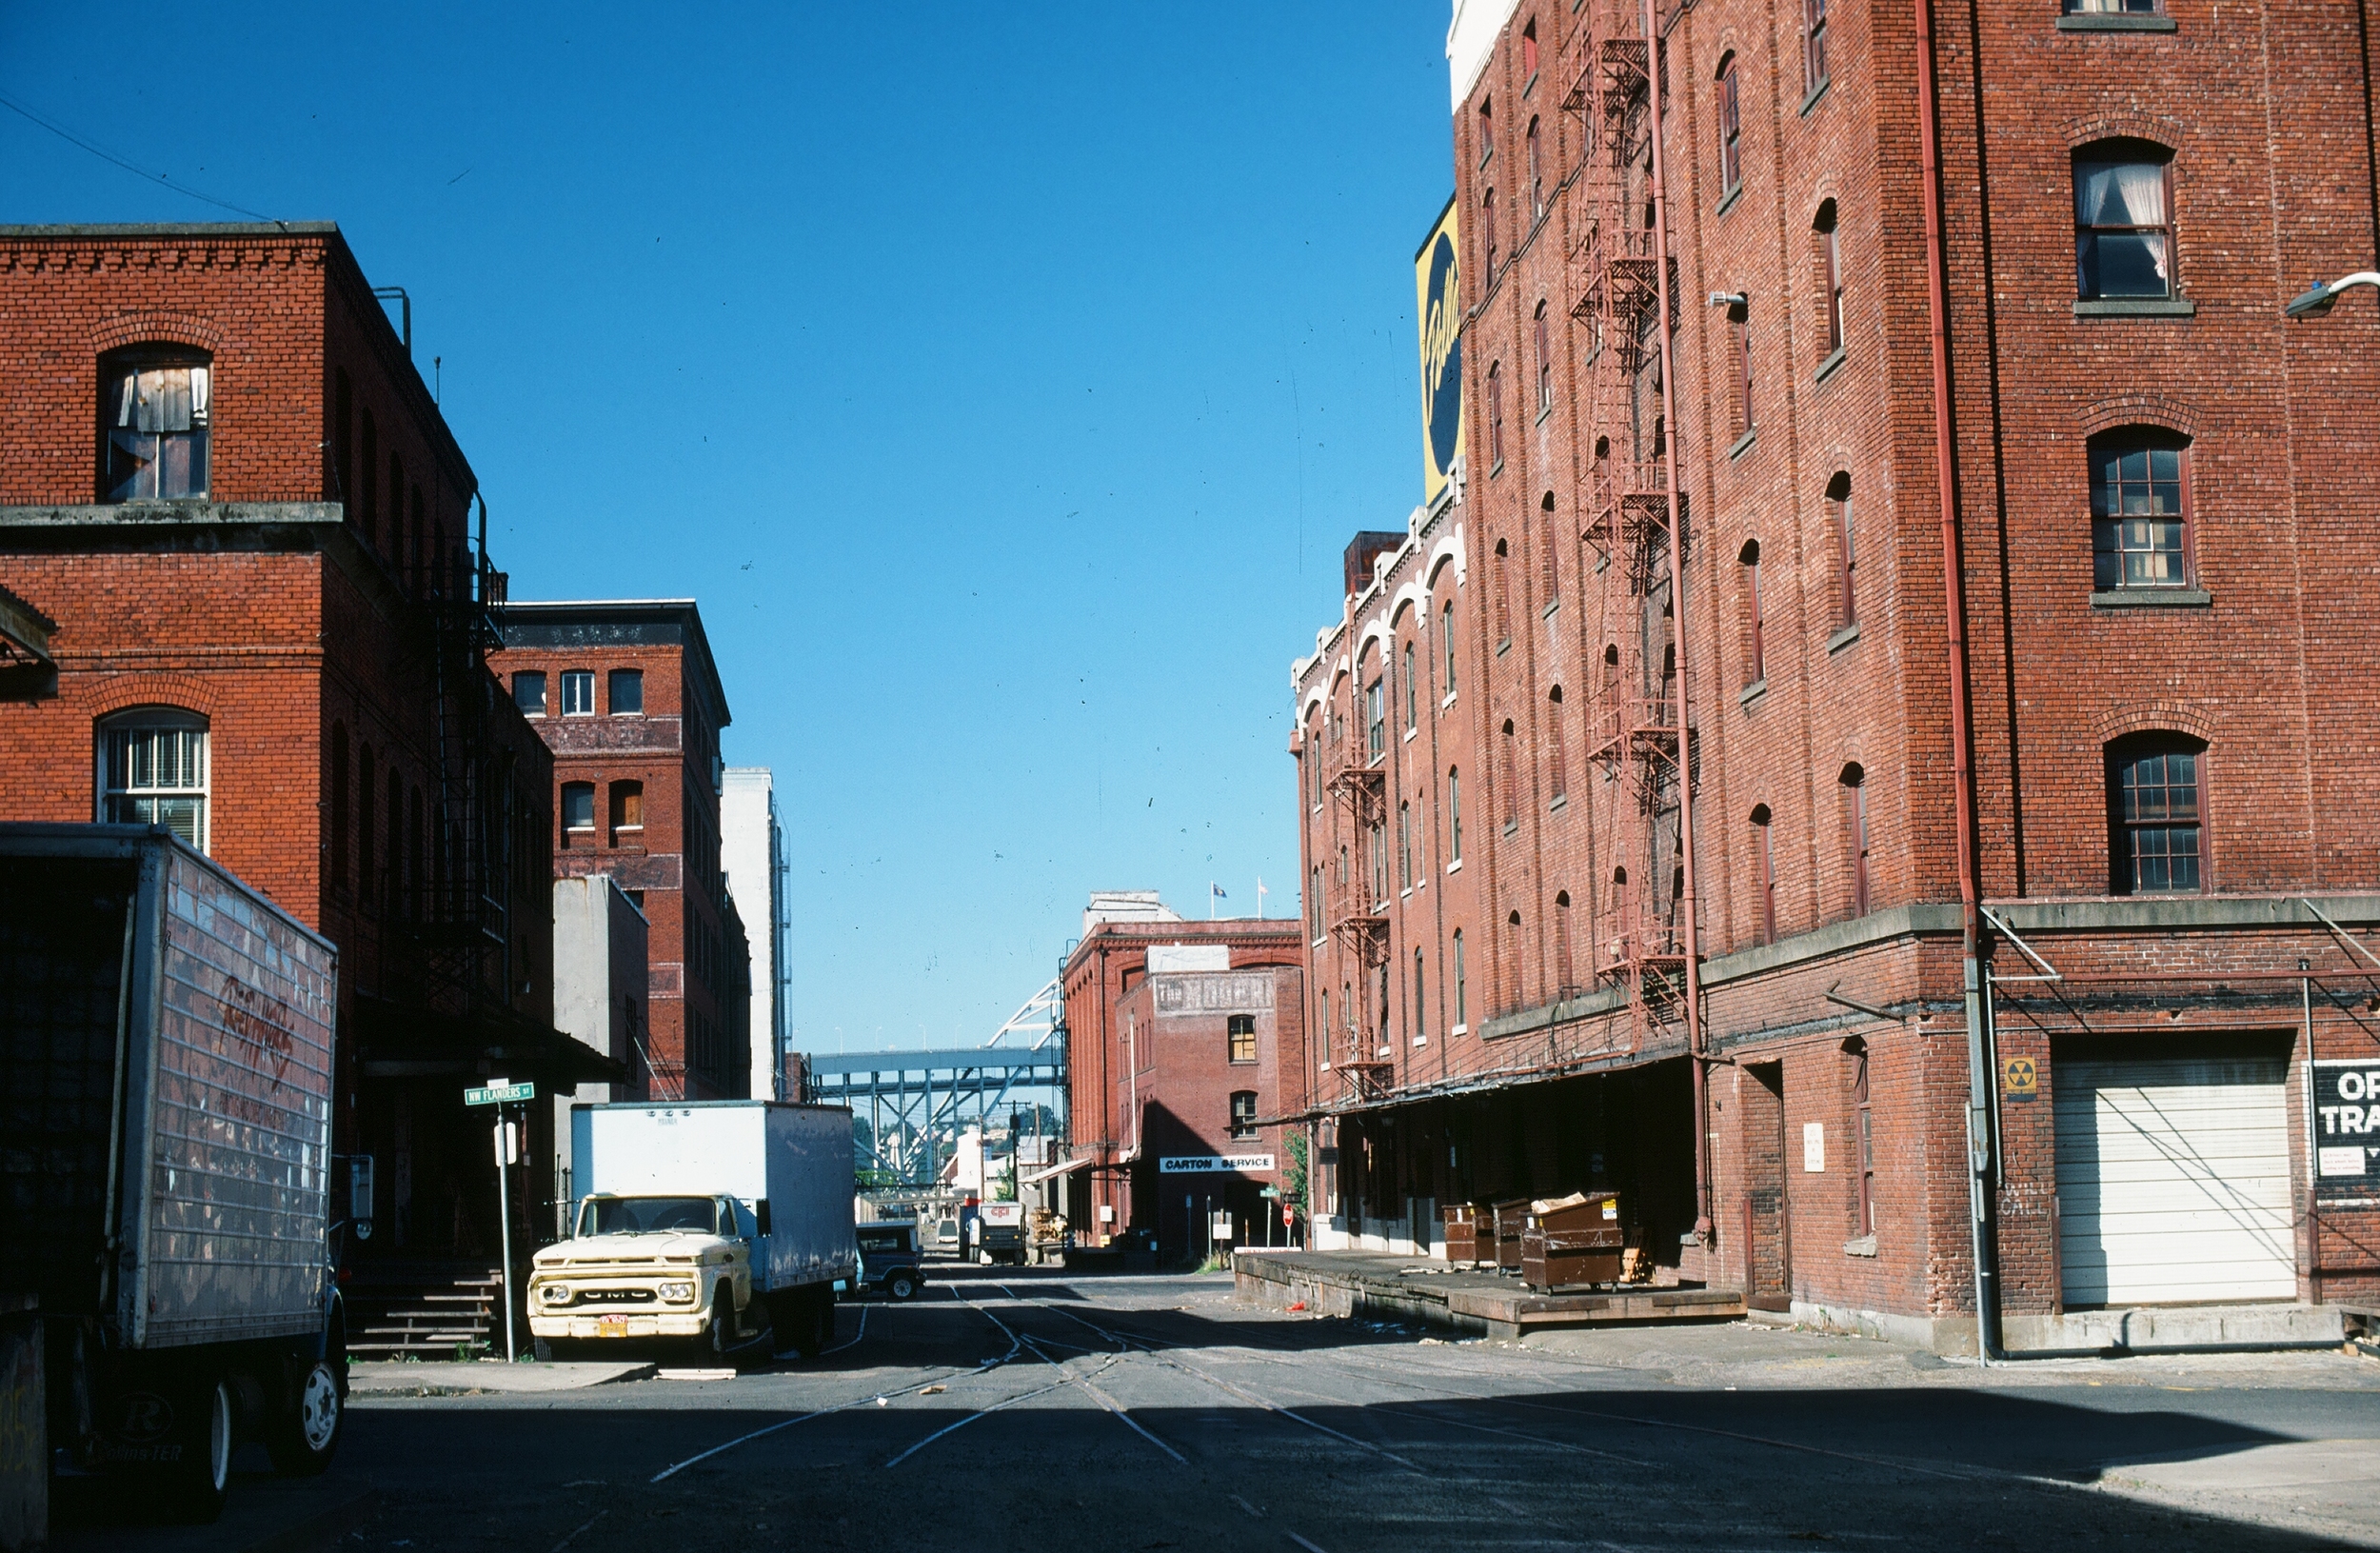  By the 1980s, the developers had discovered its potential. &nbsp;An existing collection of empty or underutilized warehouses was turned into commercial and residential loft spaces. &nbsp;An existing viaduct—the Lovejoy Ramp—was a physical barrier to